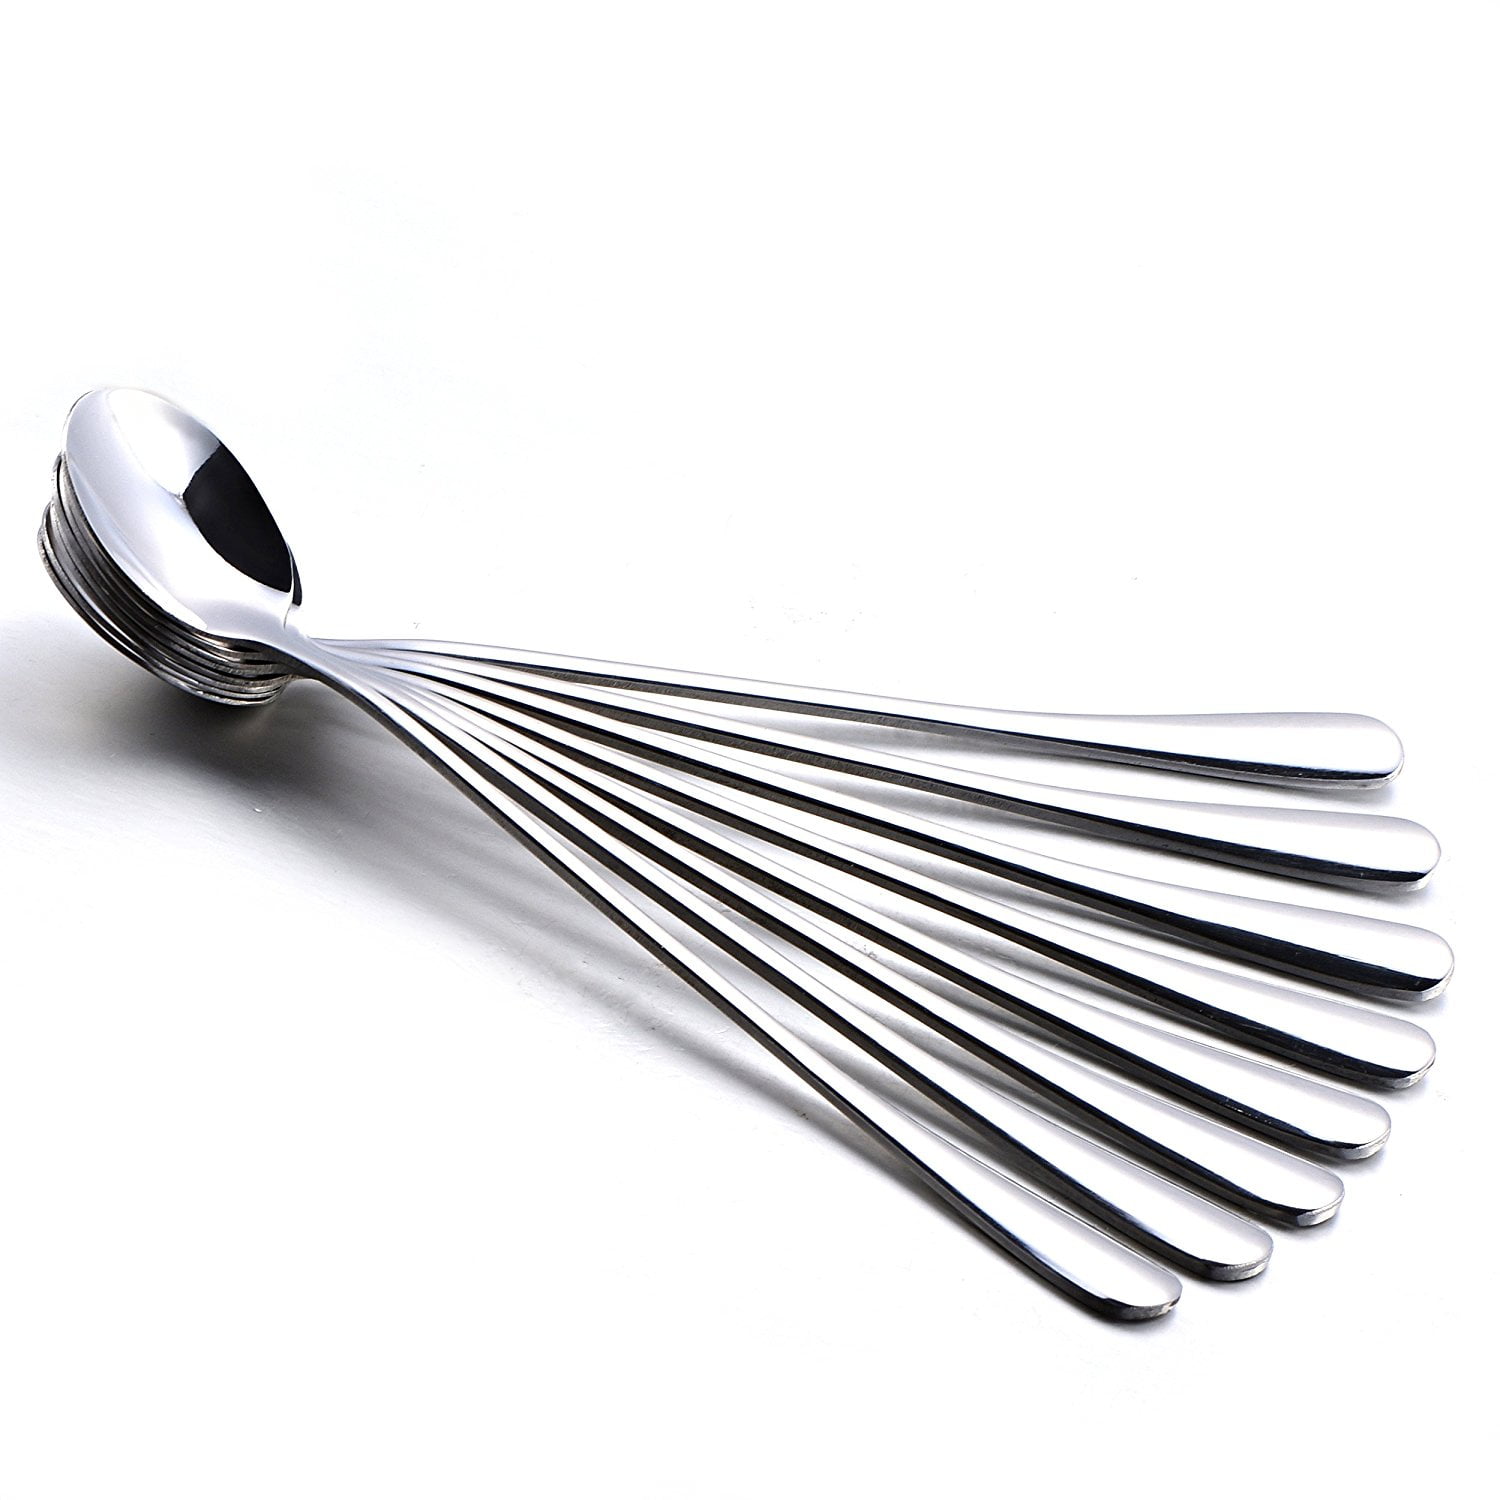 Stainless Steel Spoon Iced Tea Spoons for Mixing 5 PCS Long Handle tea Spoon 